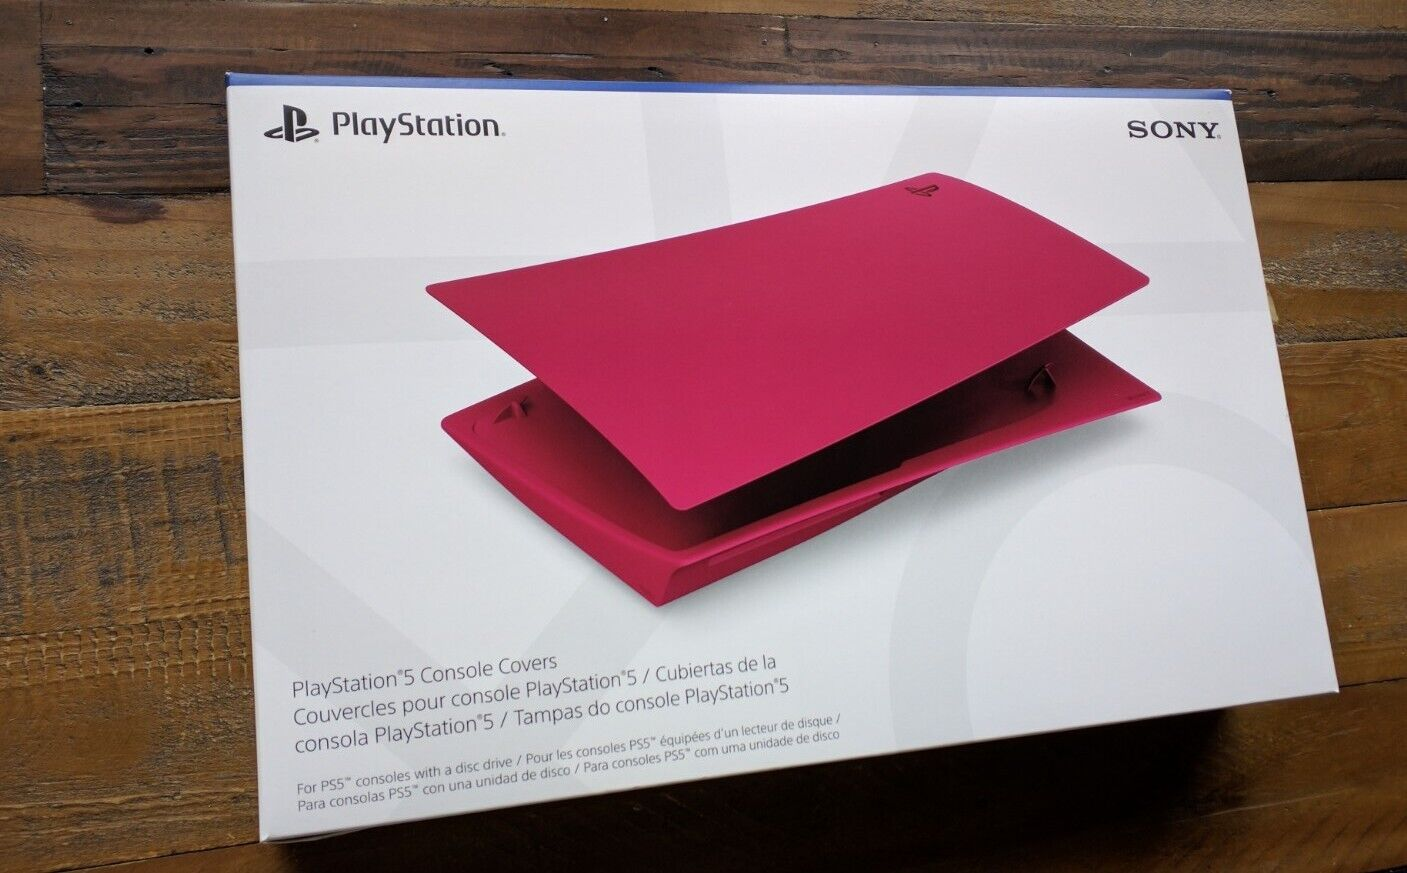  Sony PlayStation 5 Cosmic Red Cover [AM]